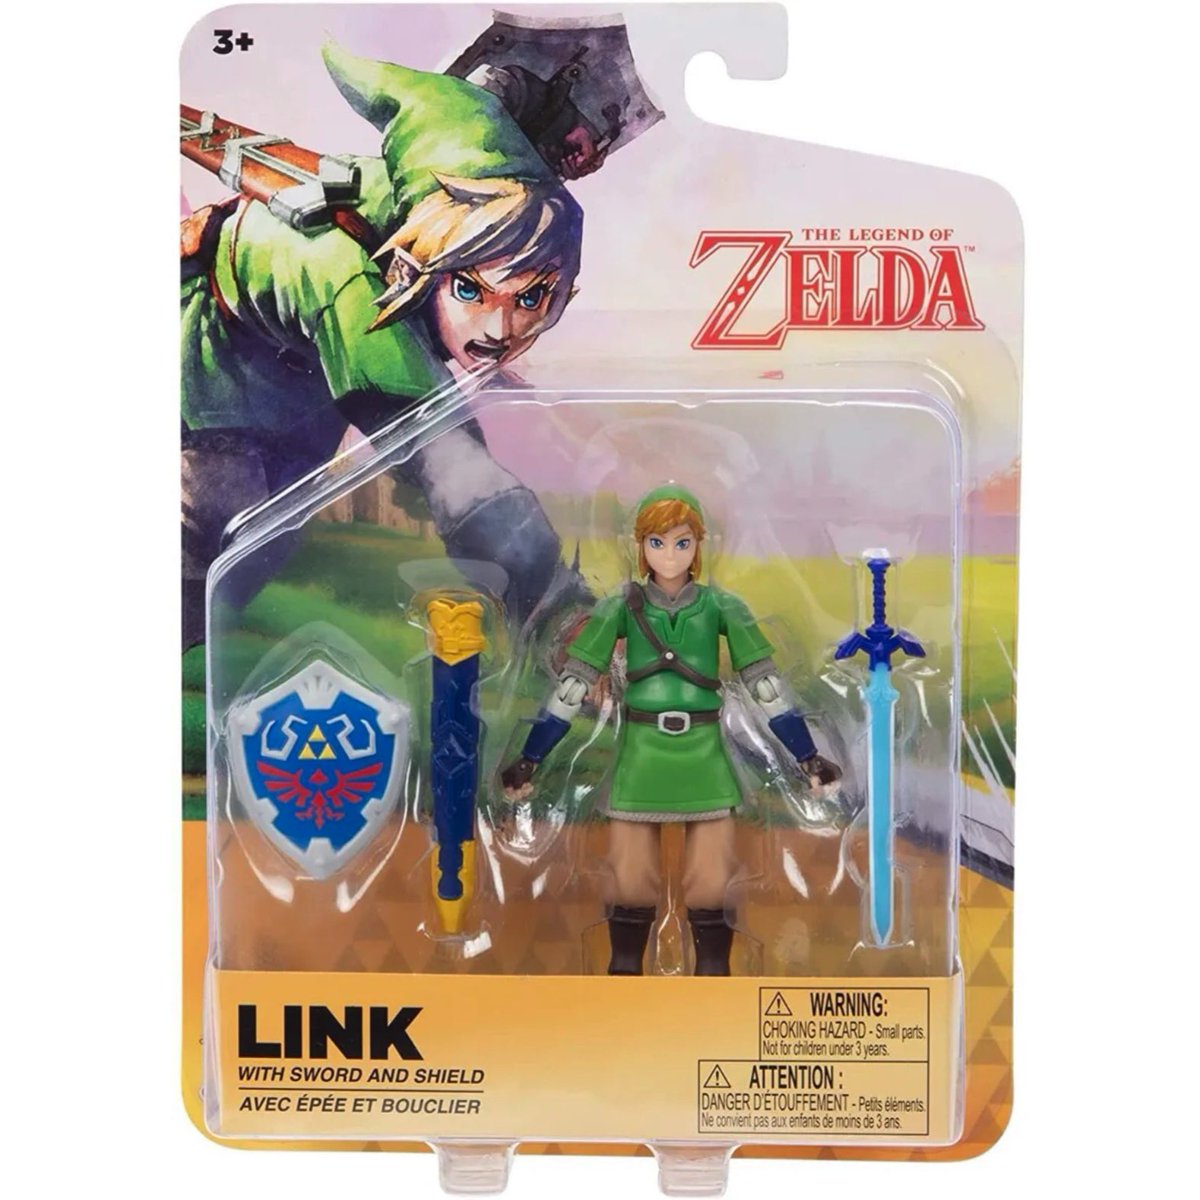 Nintendo Merch Central on X: Here's a first look at new Jakks Pacific The  Legend of Zelda Ocarina of Time Link, Breath of the Wild Link, and Skyward  Sword Link rereleases! More